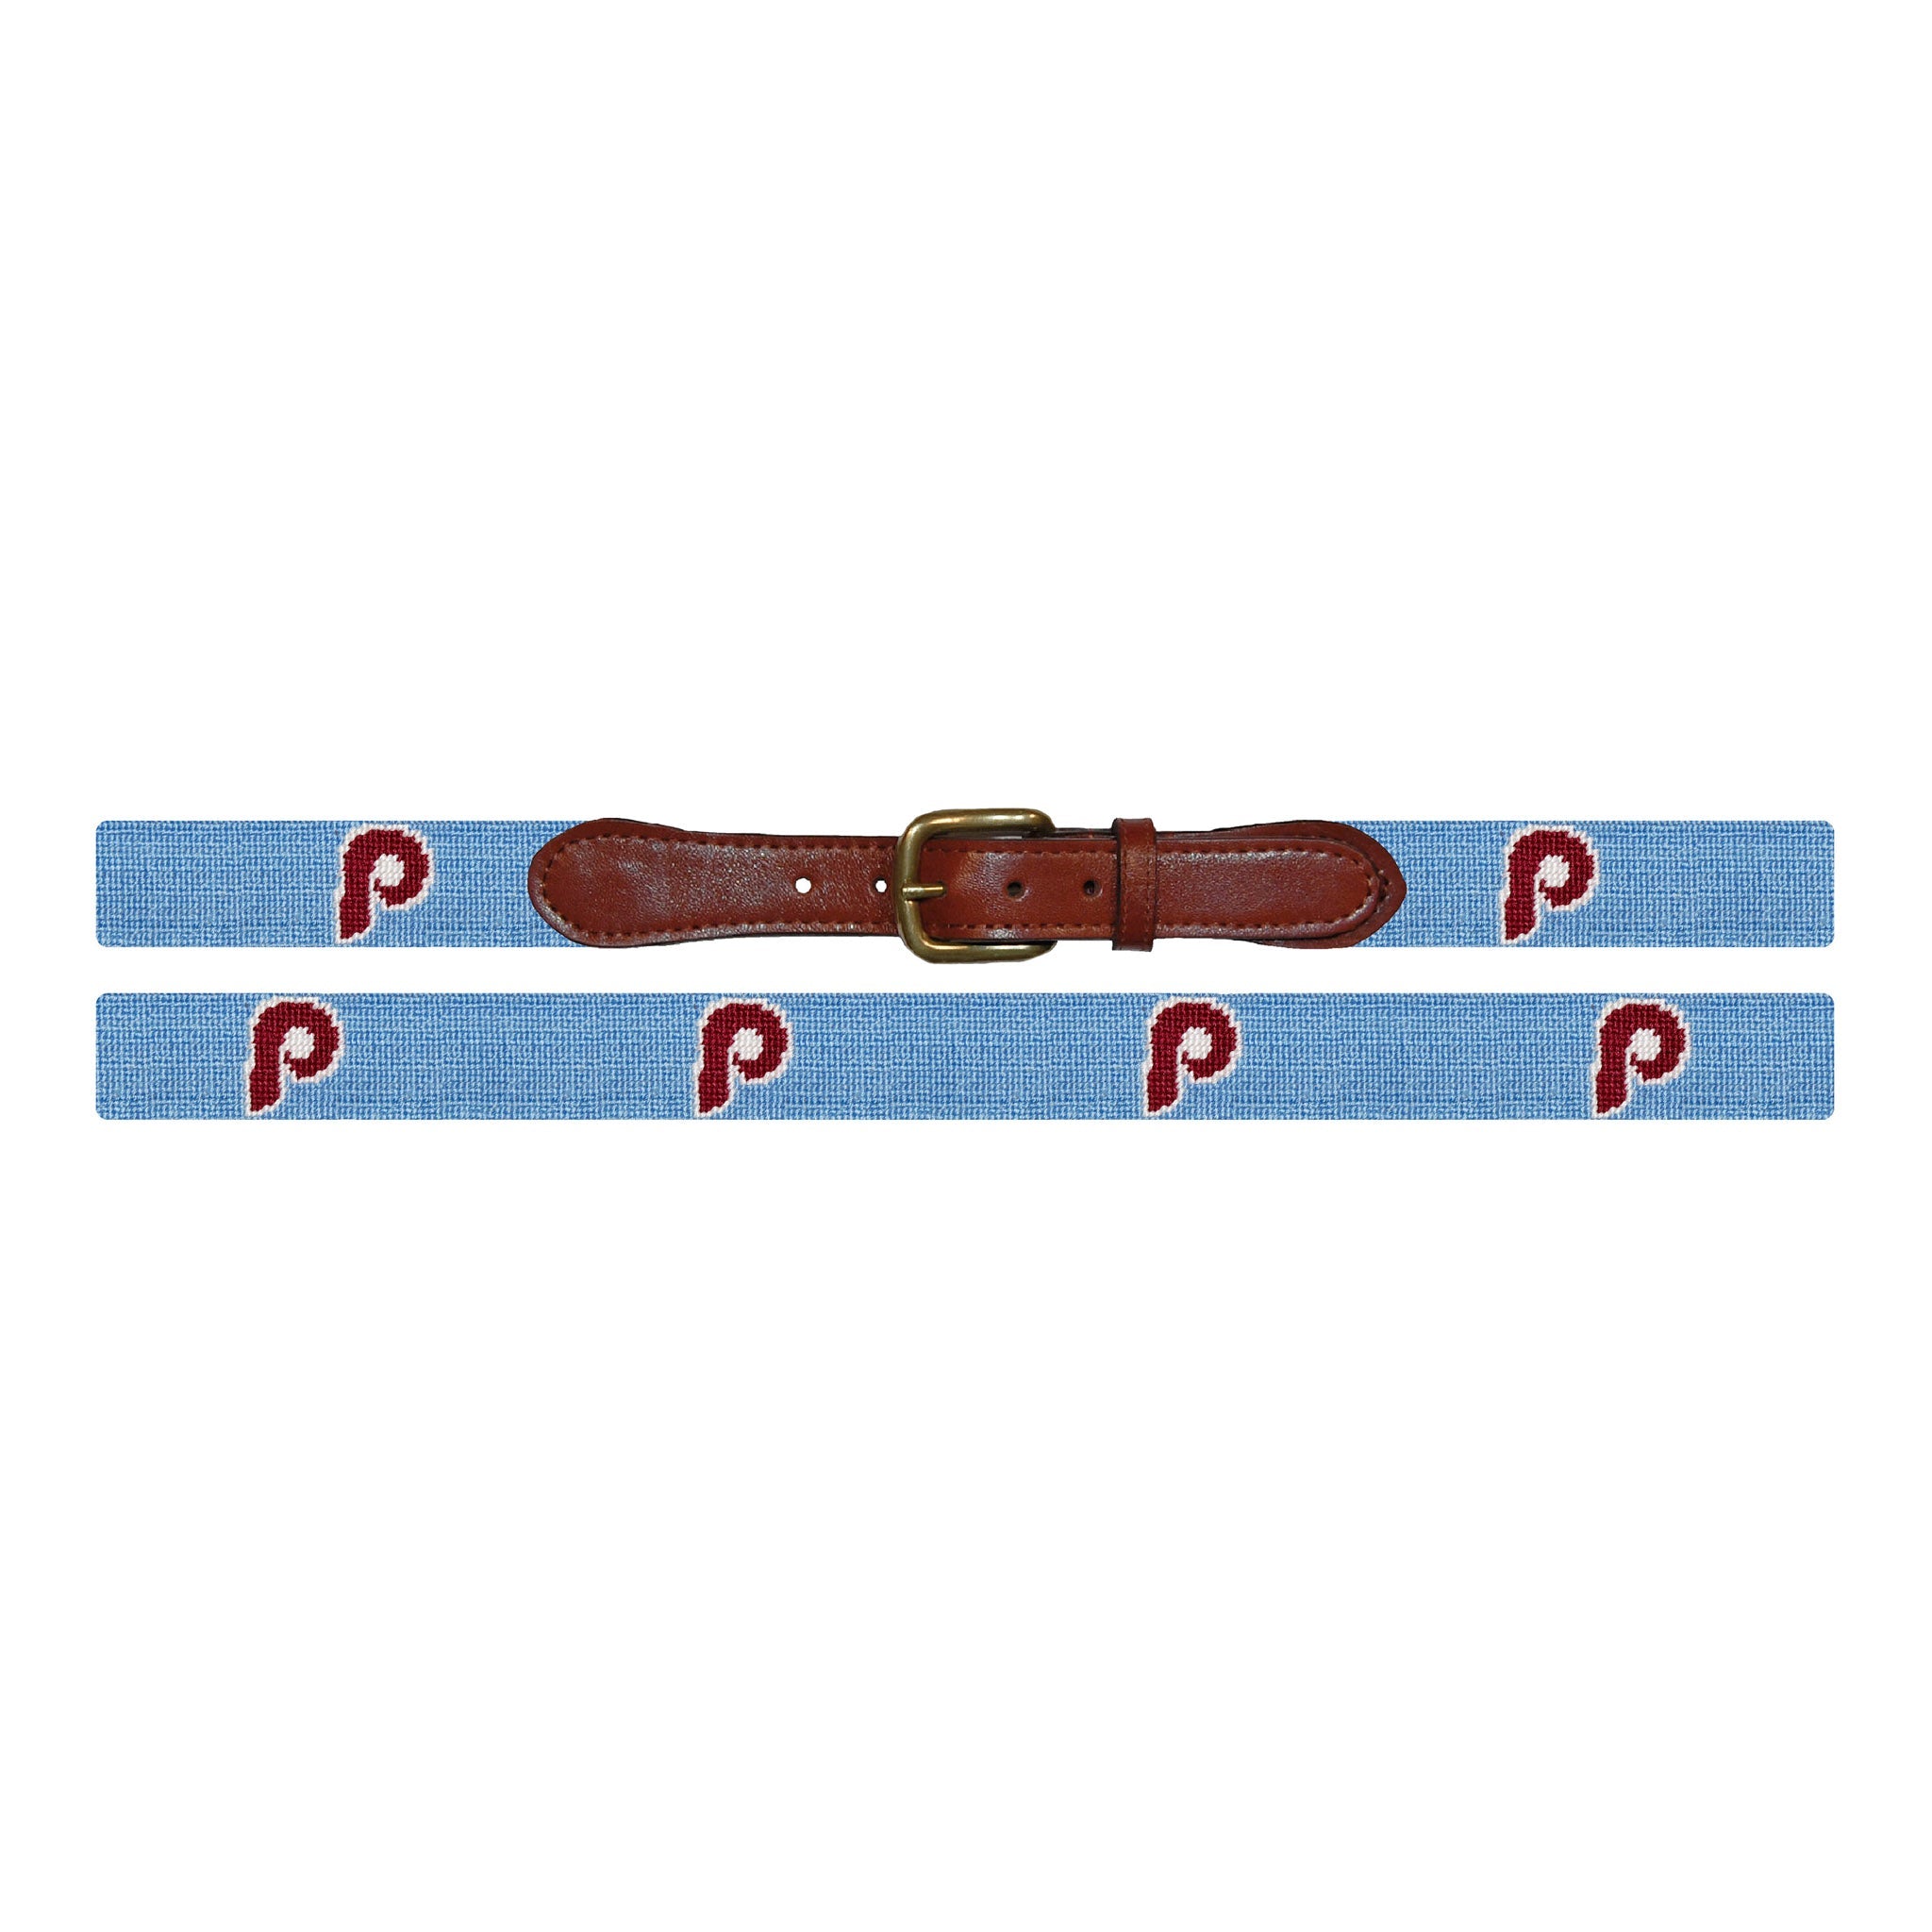 Smathers and Branson Philadelphia Phillies Cooperstown Needlepoint Belt Laid Out 